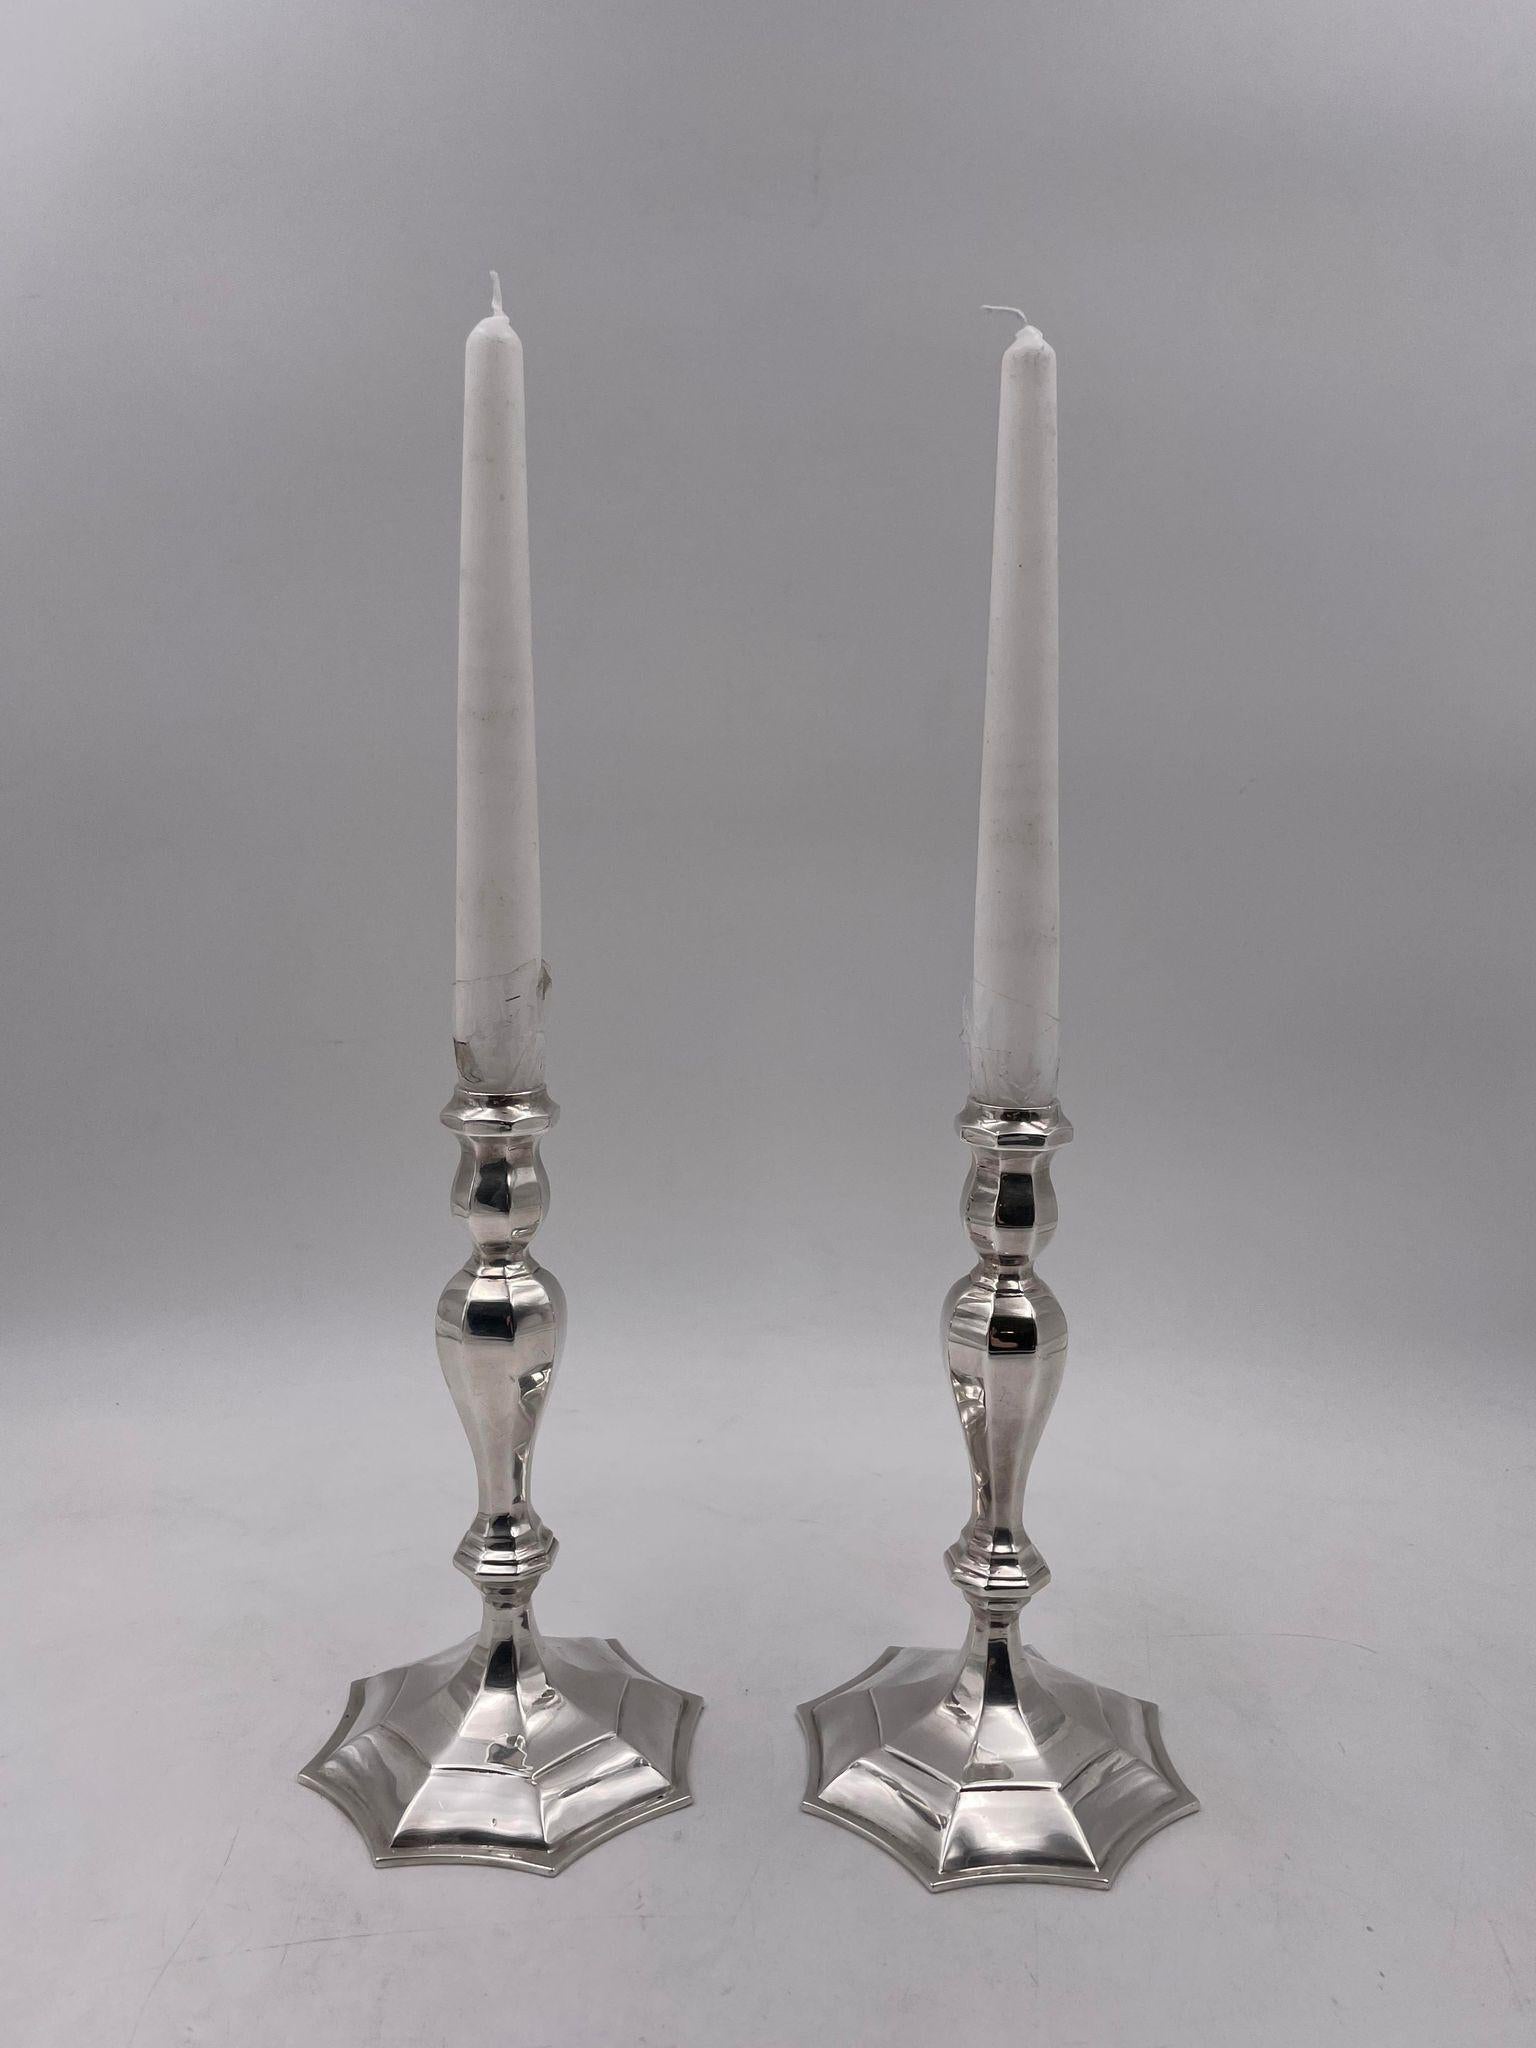 Tiffany & Co. pair of two rare English-made sterling silver candlesticks (h 7.5 in; w 4.5 in) from 1959. They are in a Mid-Century Modern style with a beautiful geometric design. Total weight is 21.2 ozt. 

Founded in 1837 by Charles Lewis Tiffany